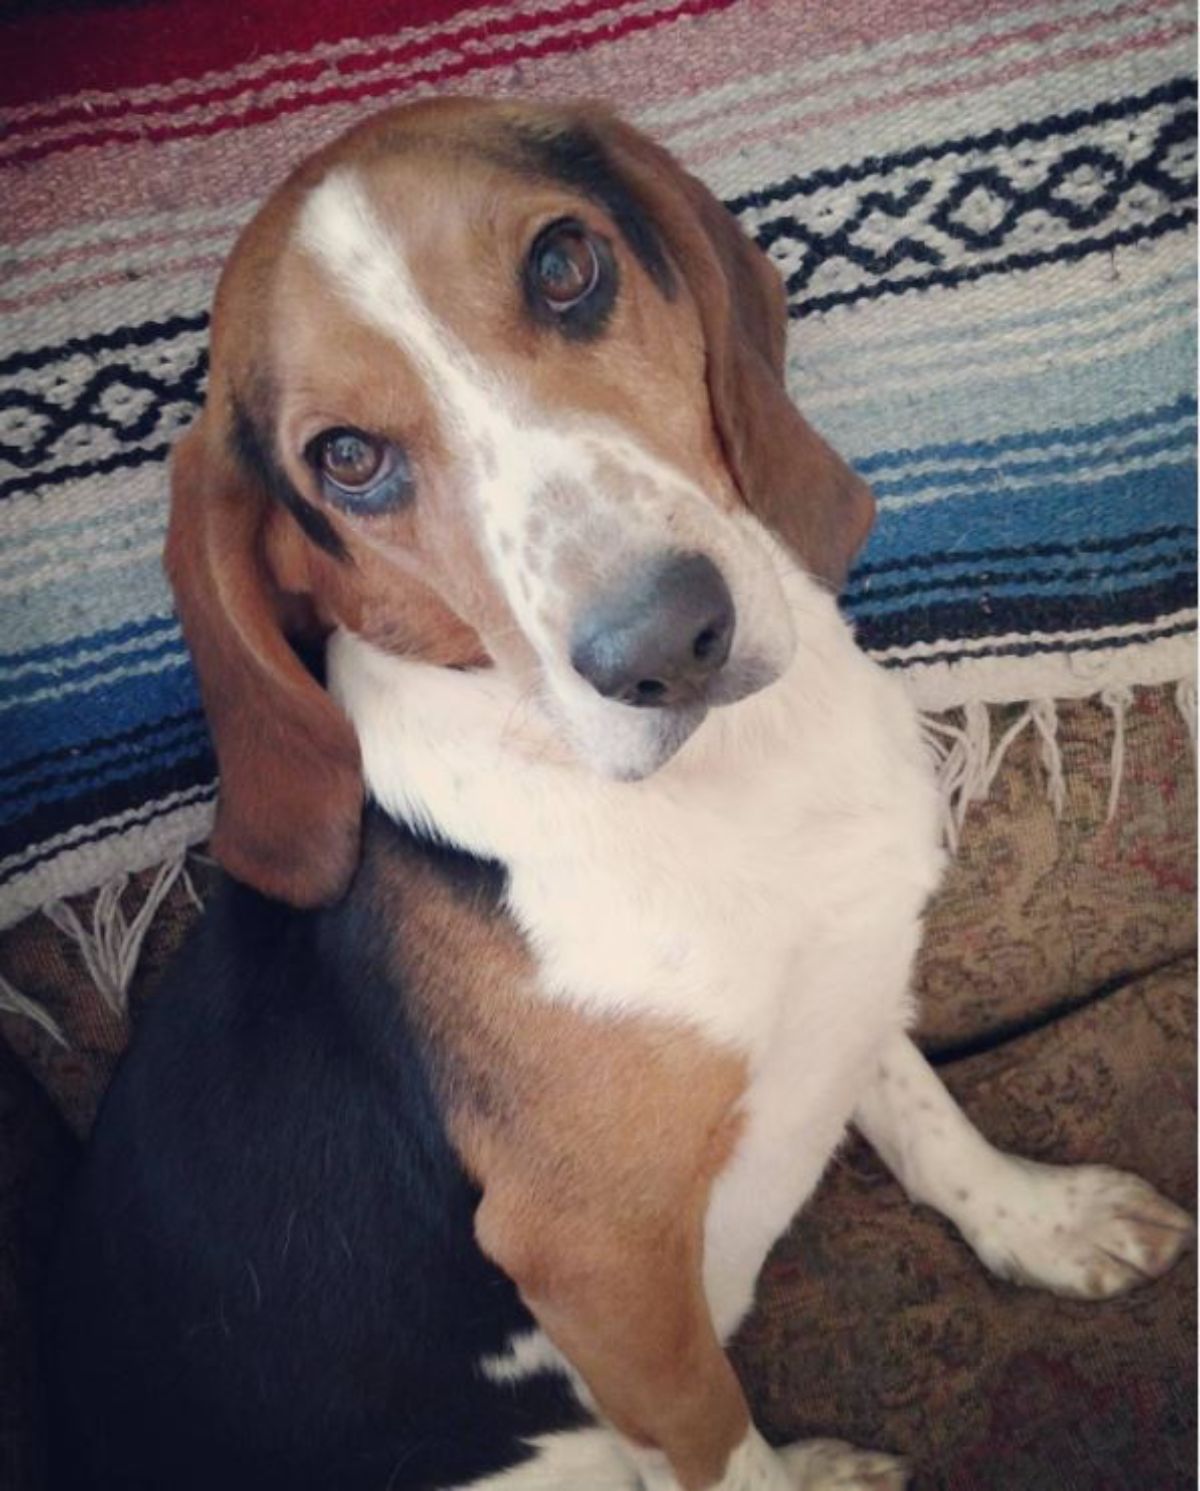 Beagle mixed with basset hound dog sitting on the couch